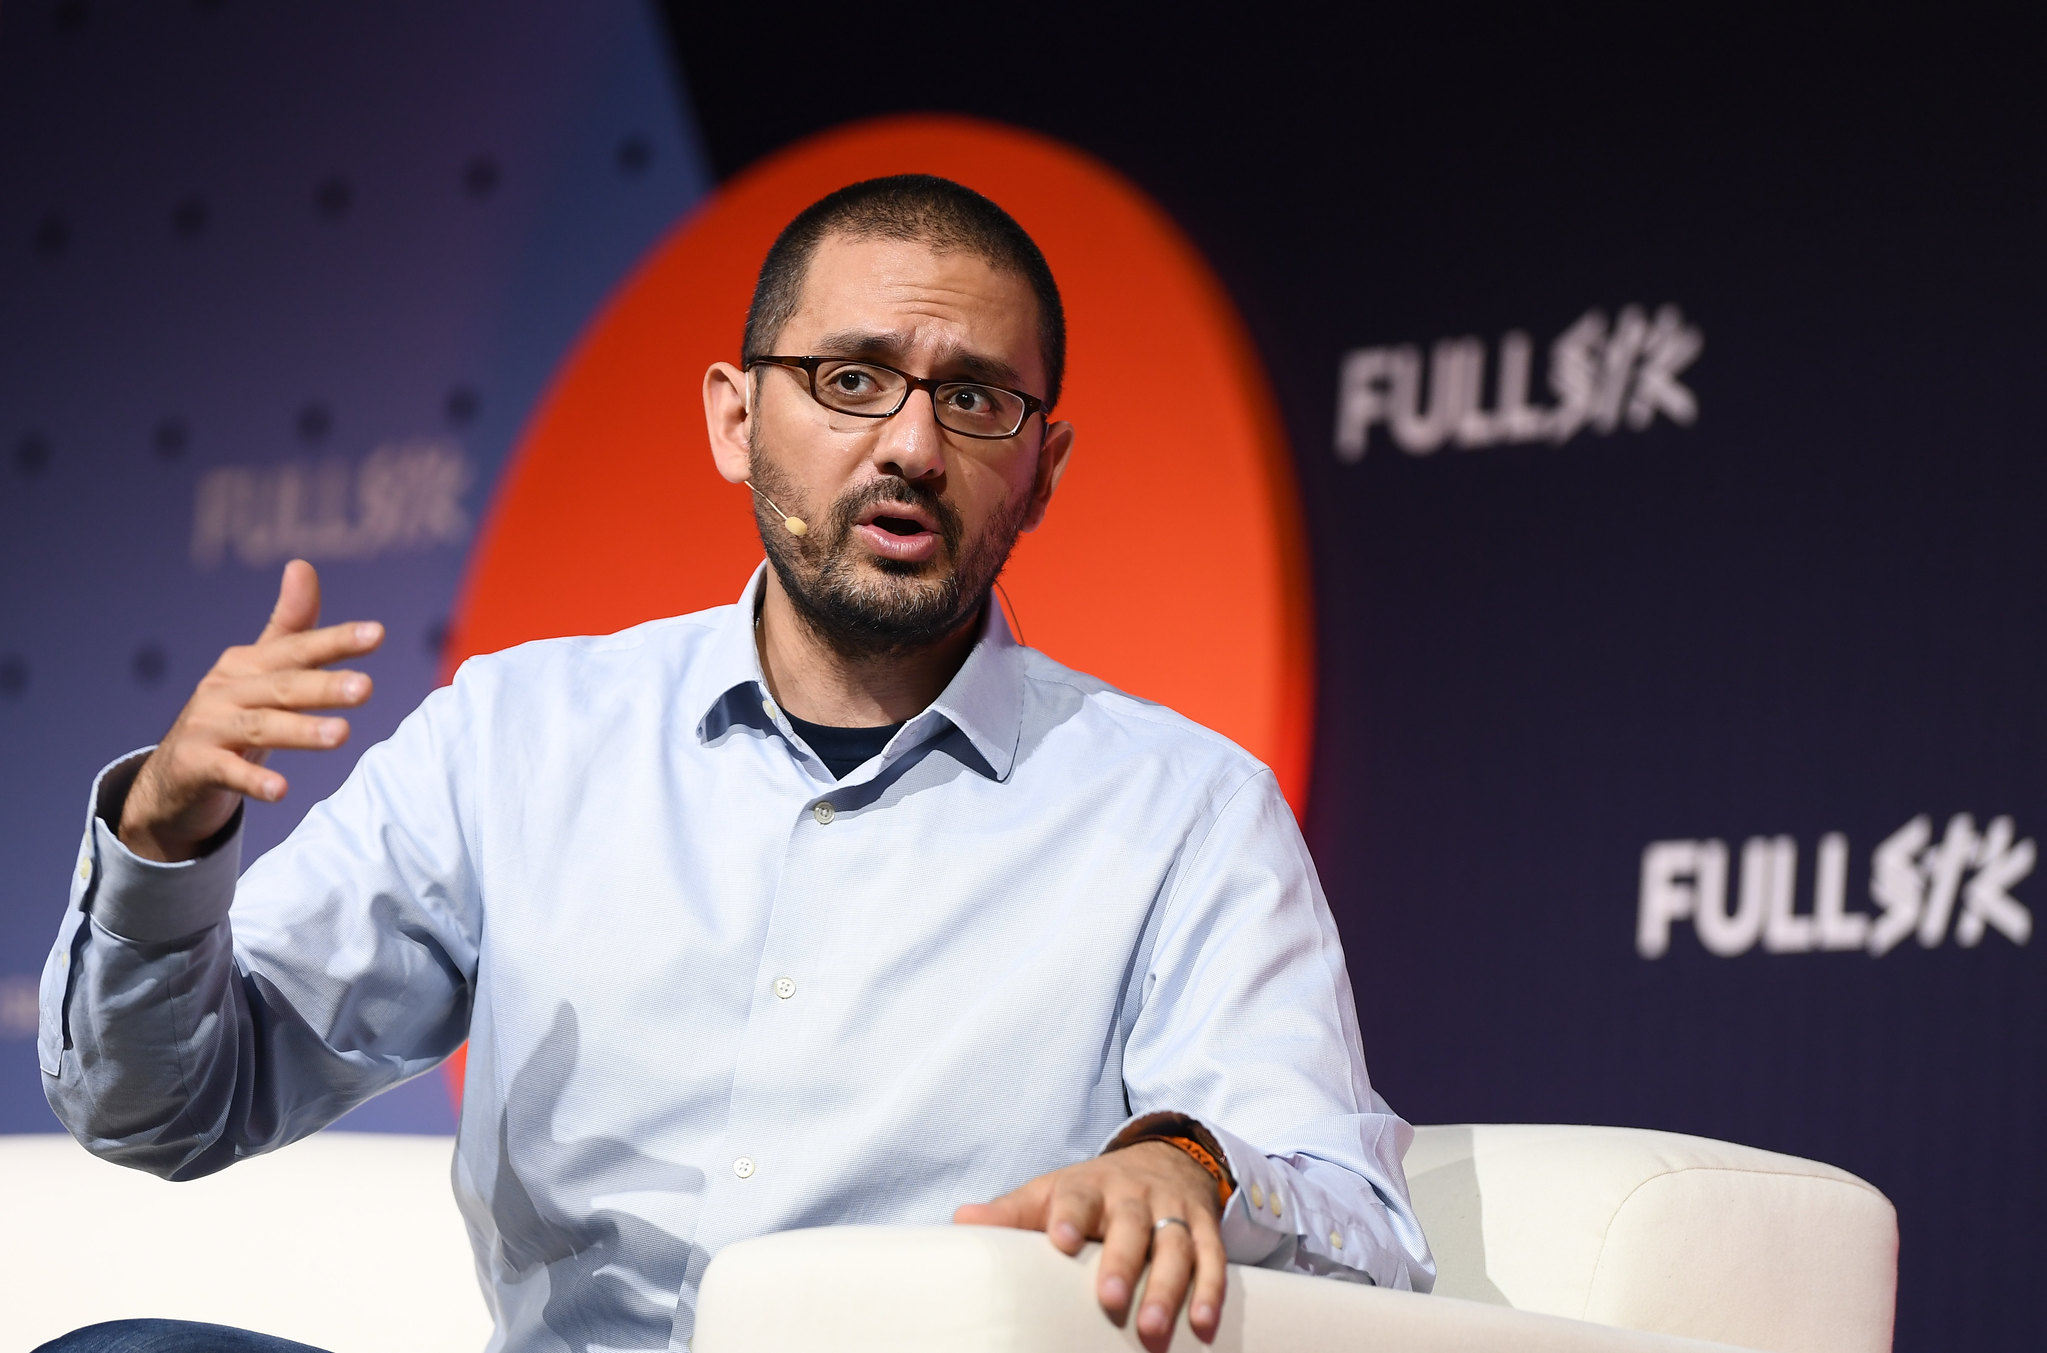 Photo of a person (Raffi Krikorian, former CTO of the Democratic National Committee (DNC)), speaking on stage at FullSTK. They are sitting on a chair and gesturing with their hands. They are wearing an over-ear microphone.